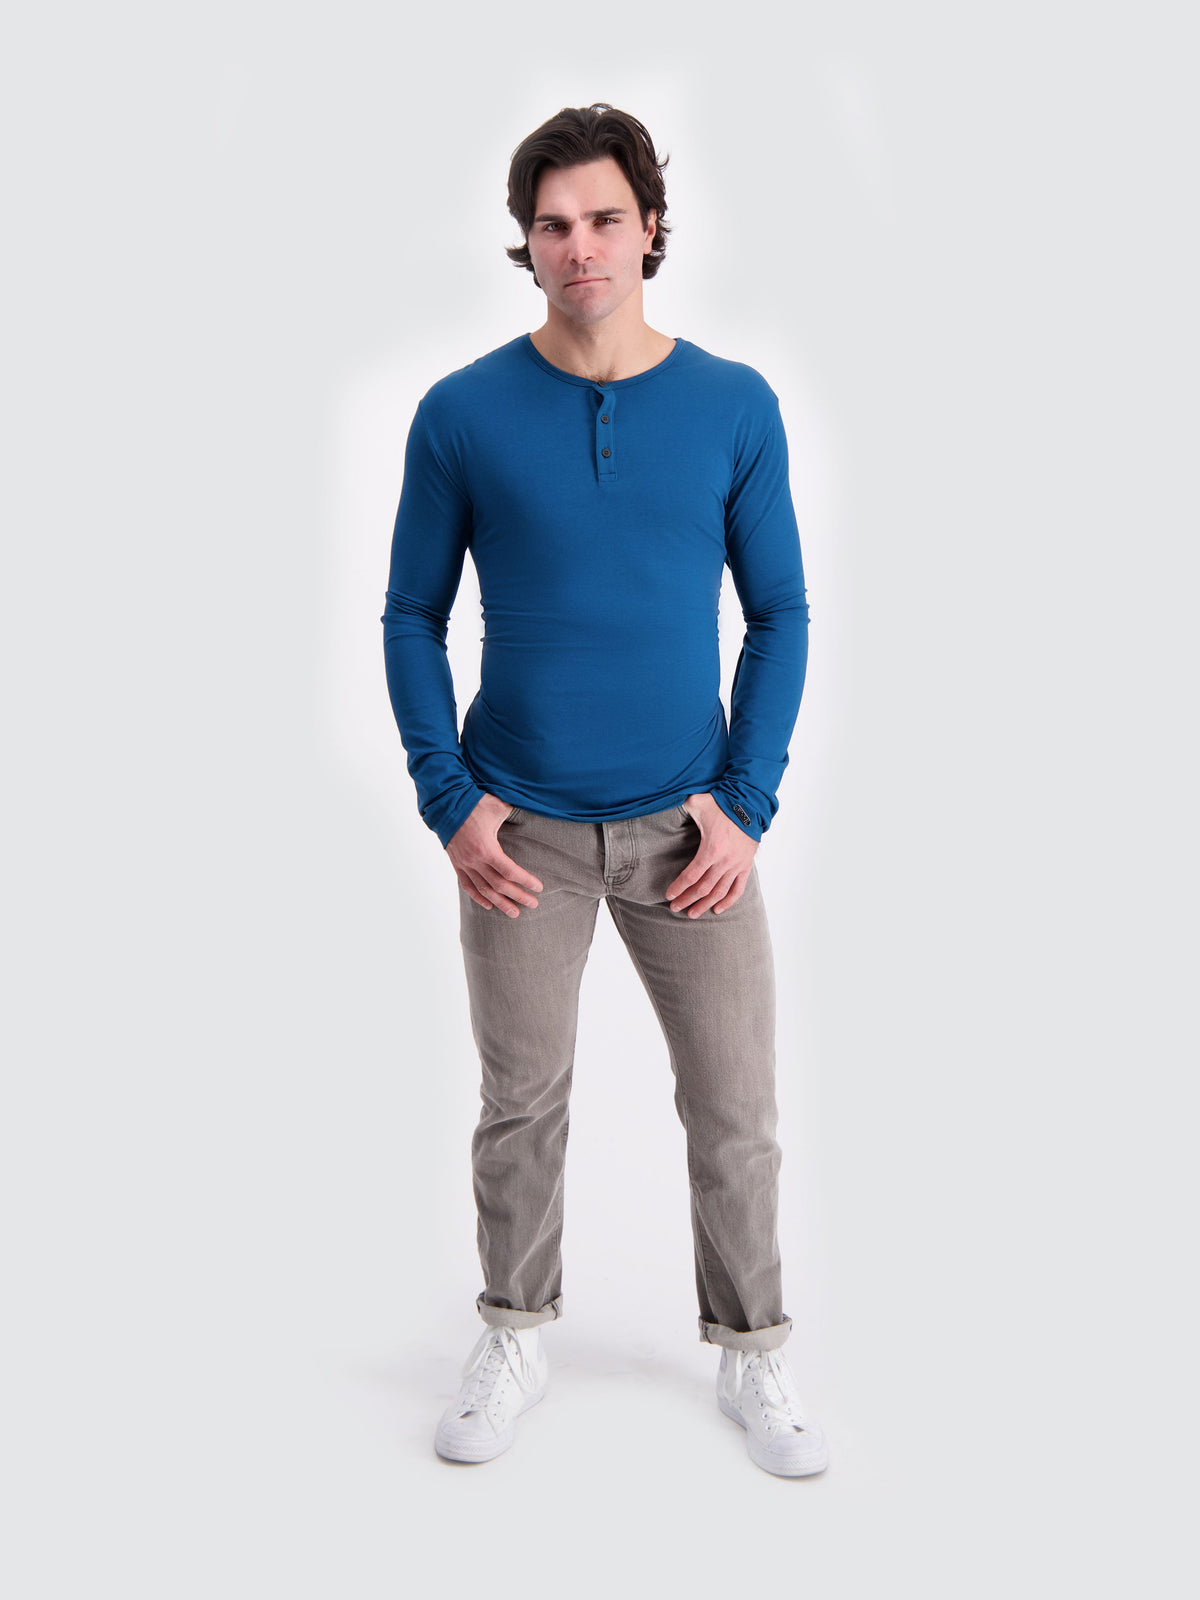 Two Blind Brothers - Mens Men's Long Sleeve Solid Henley Charcoal